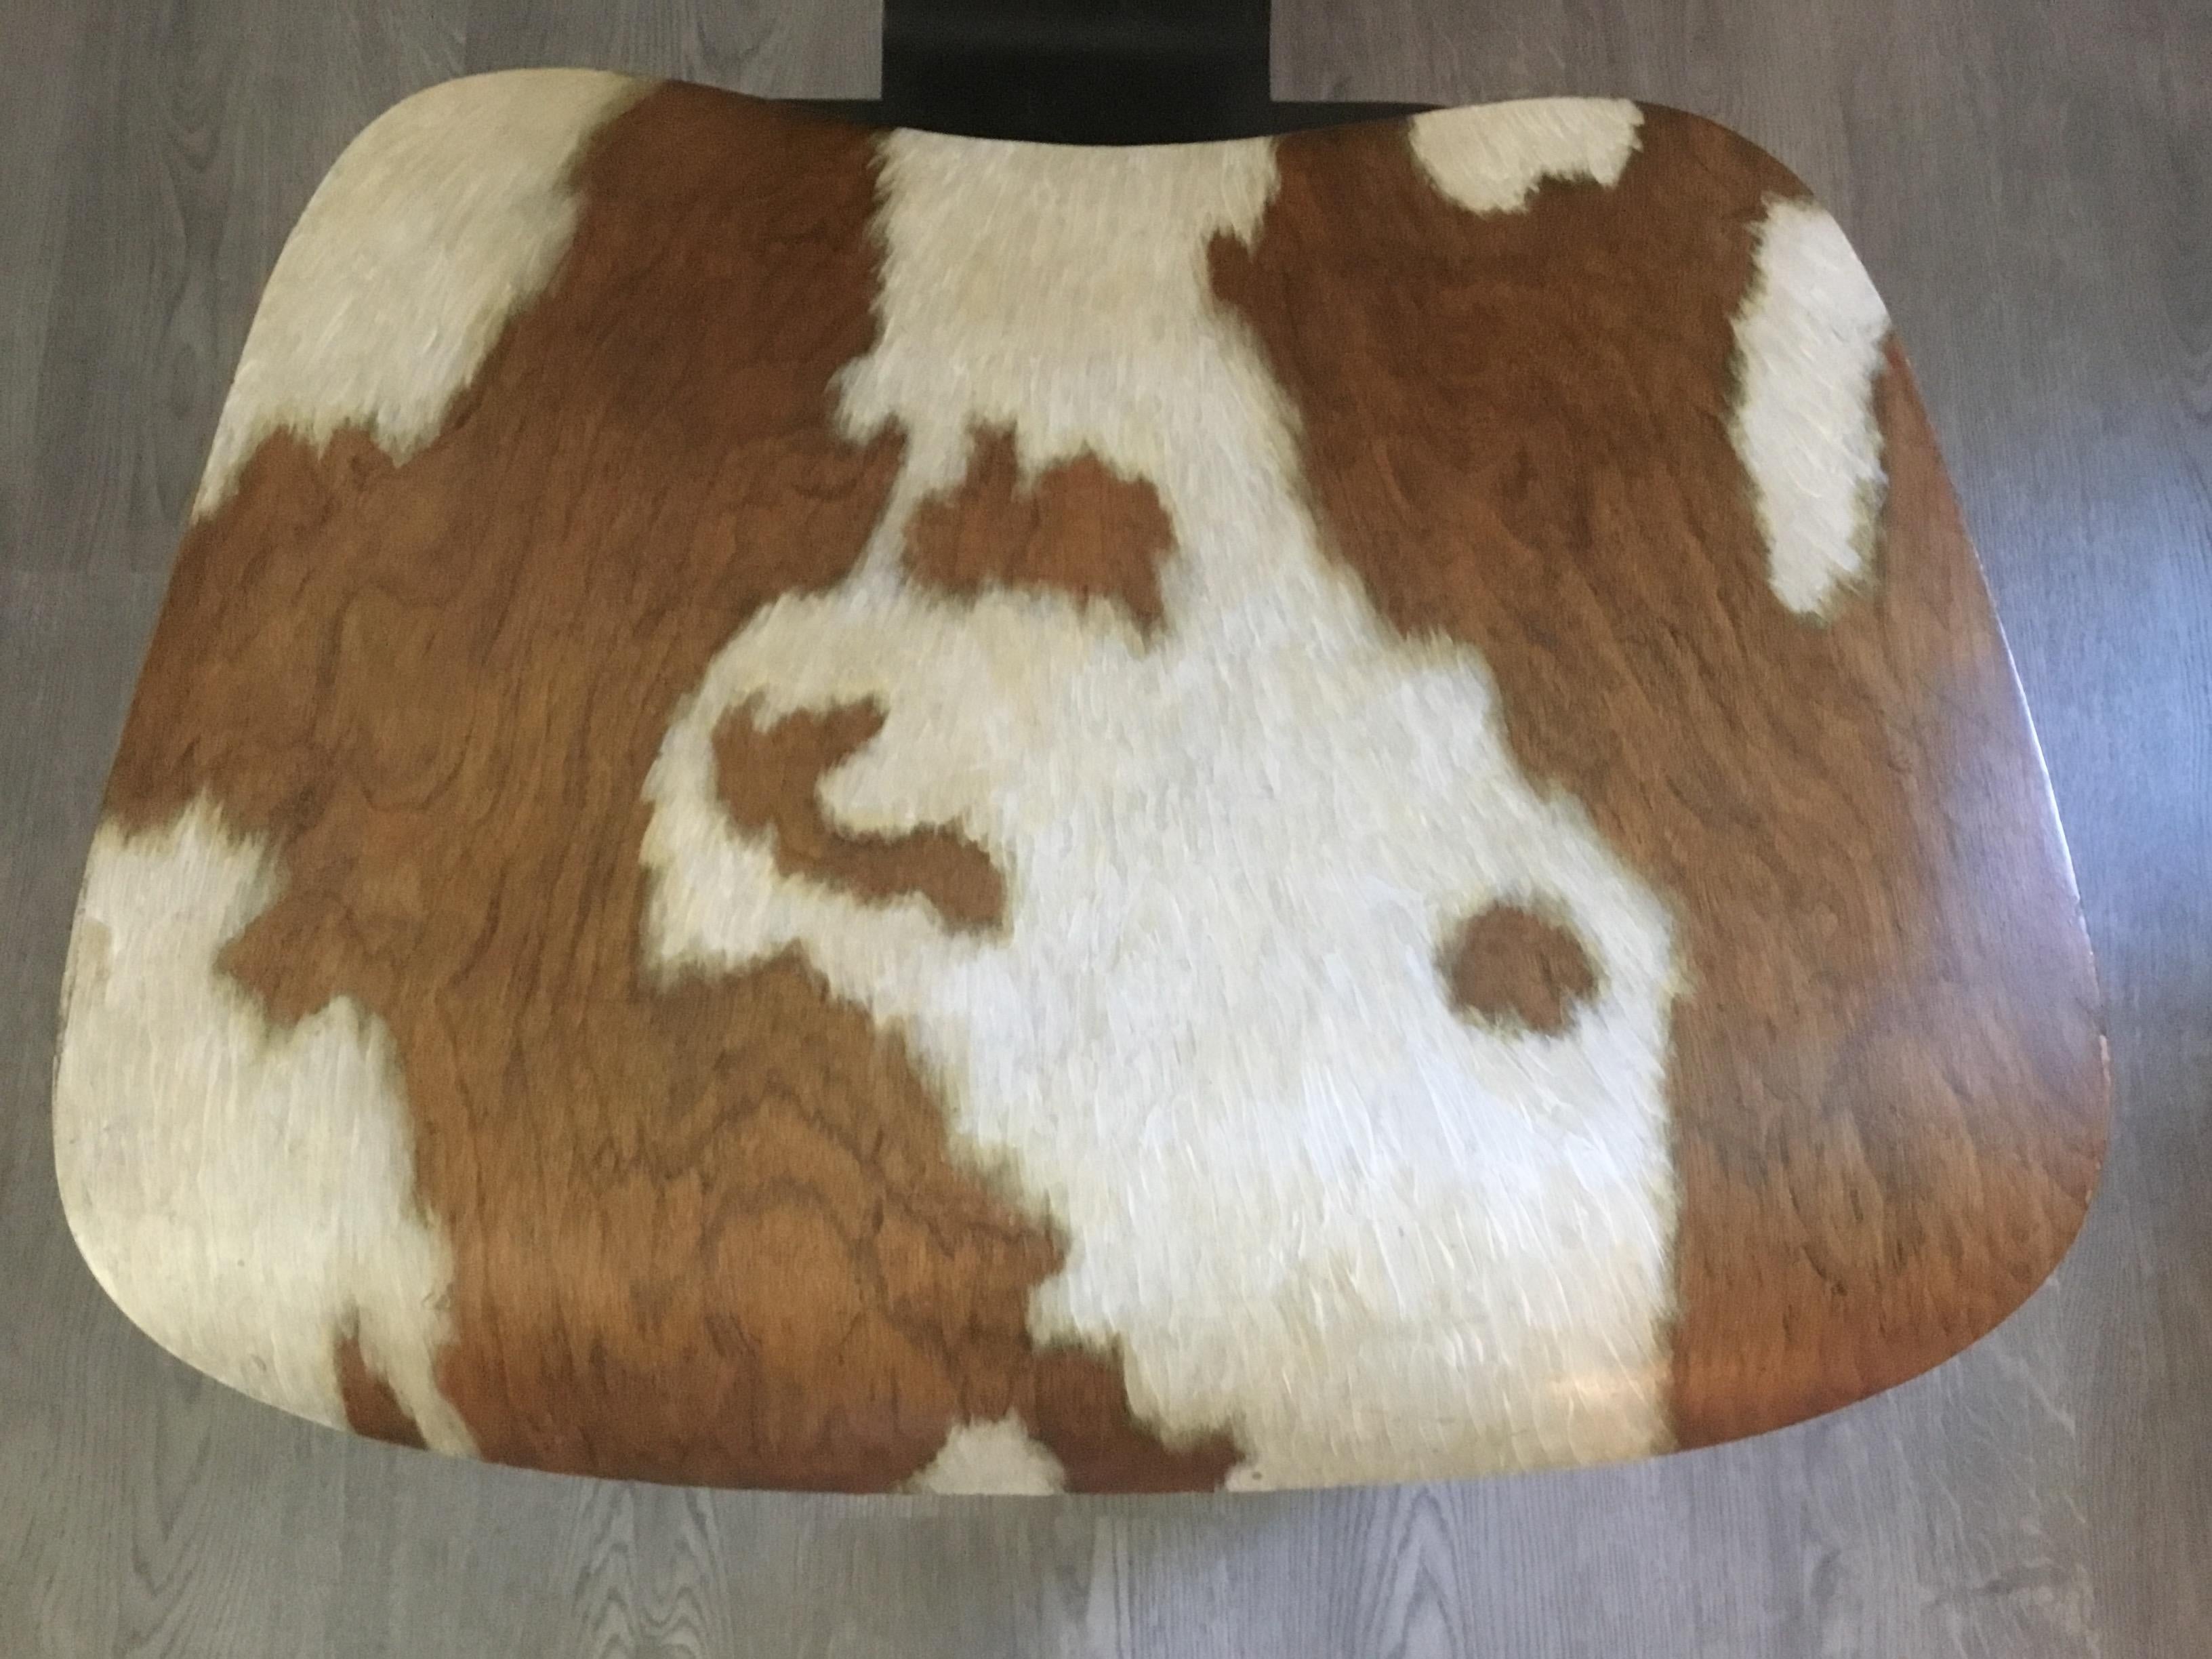 American Pair of Iconic LCW Eames Chairs with Faux Cowhide Finish by Lynn Curlee